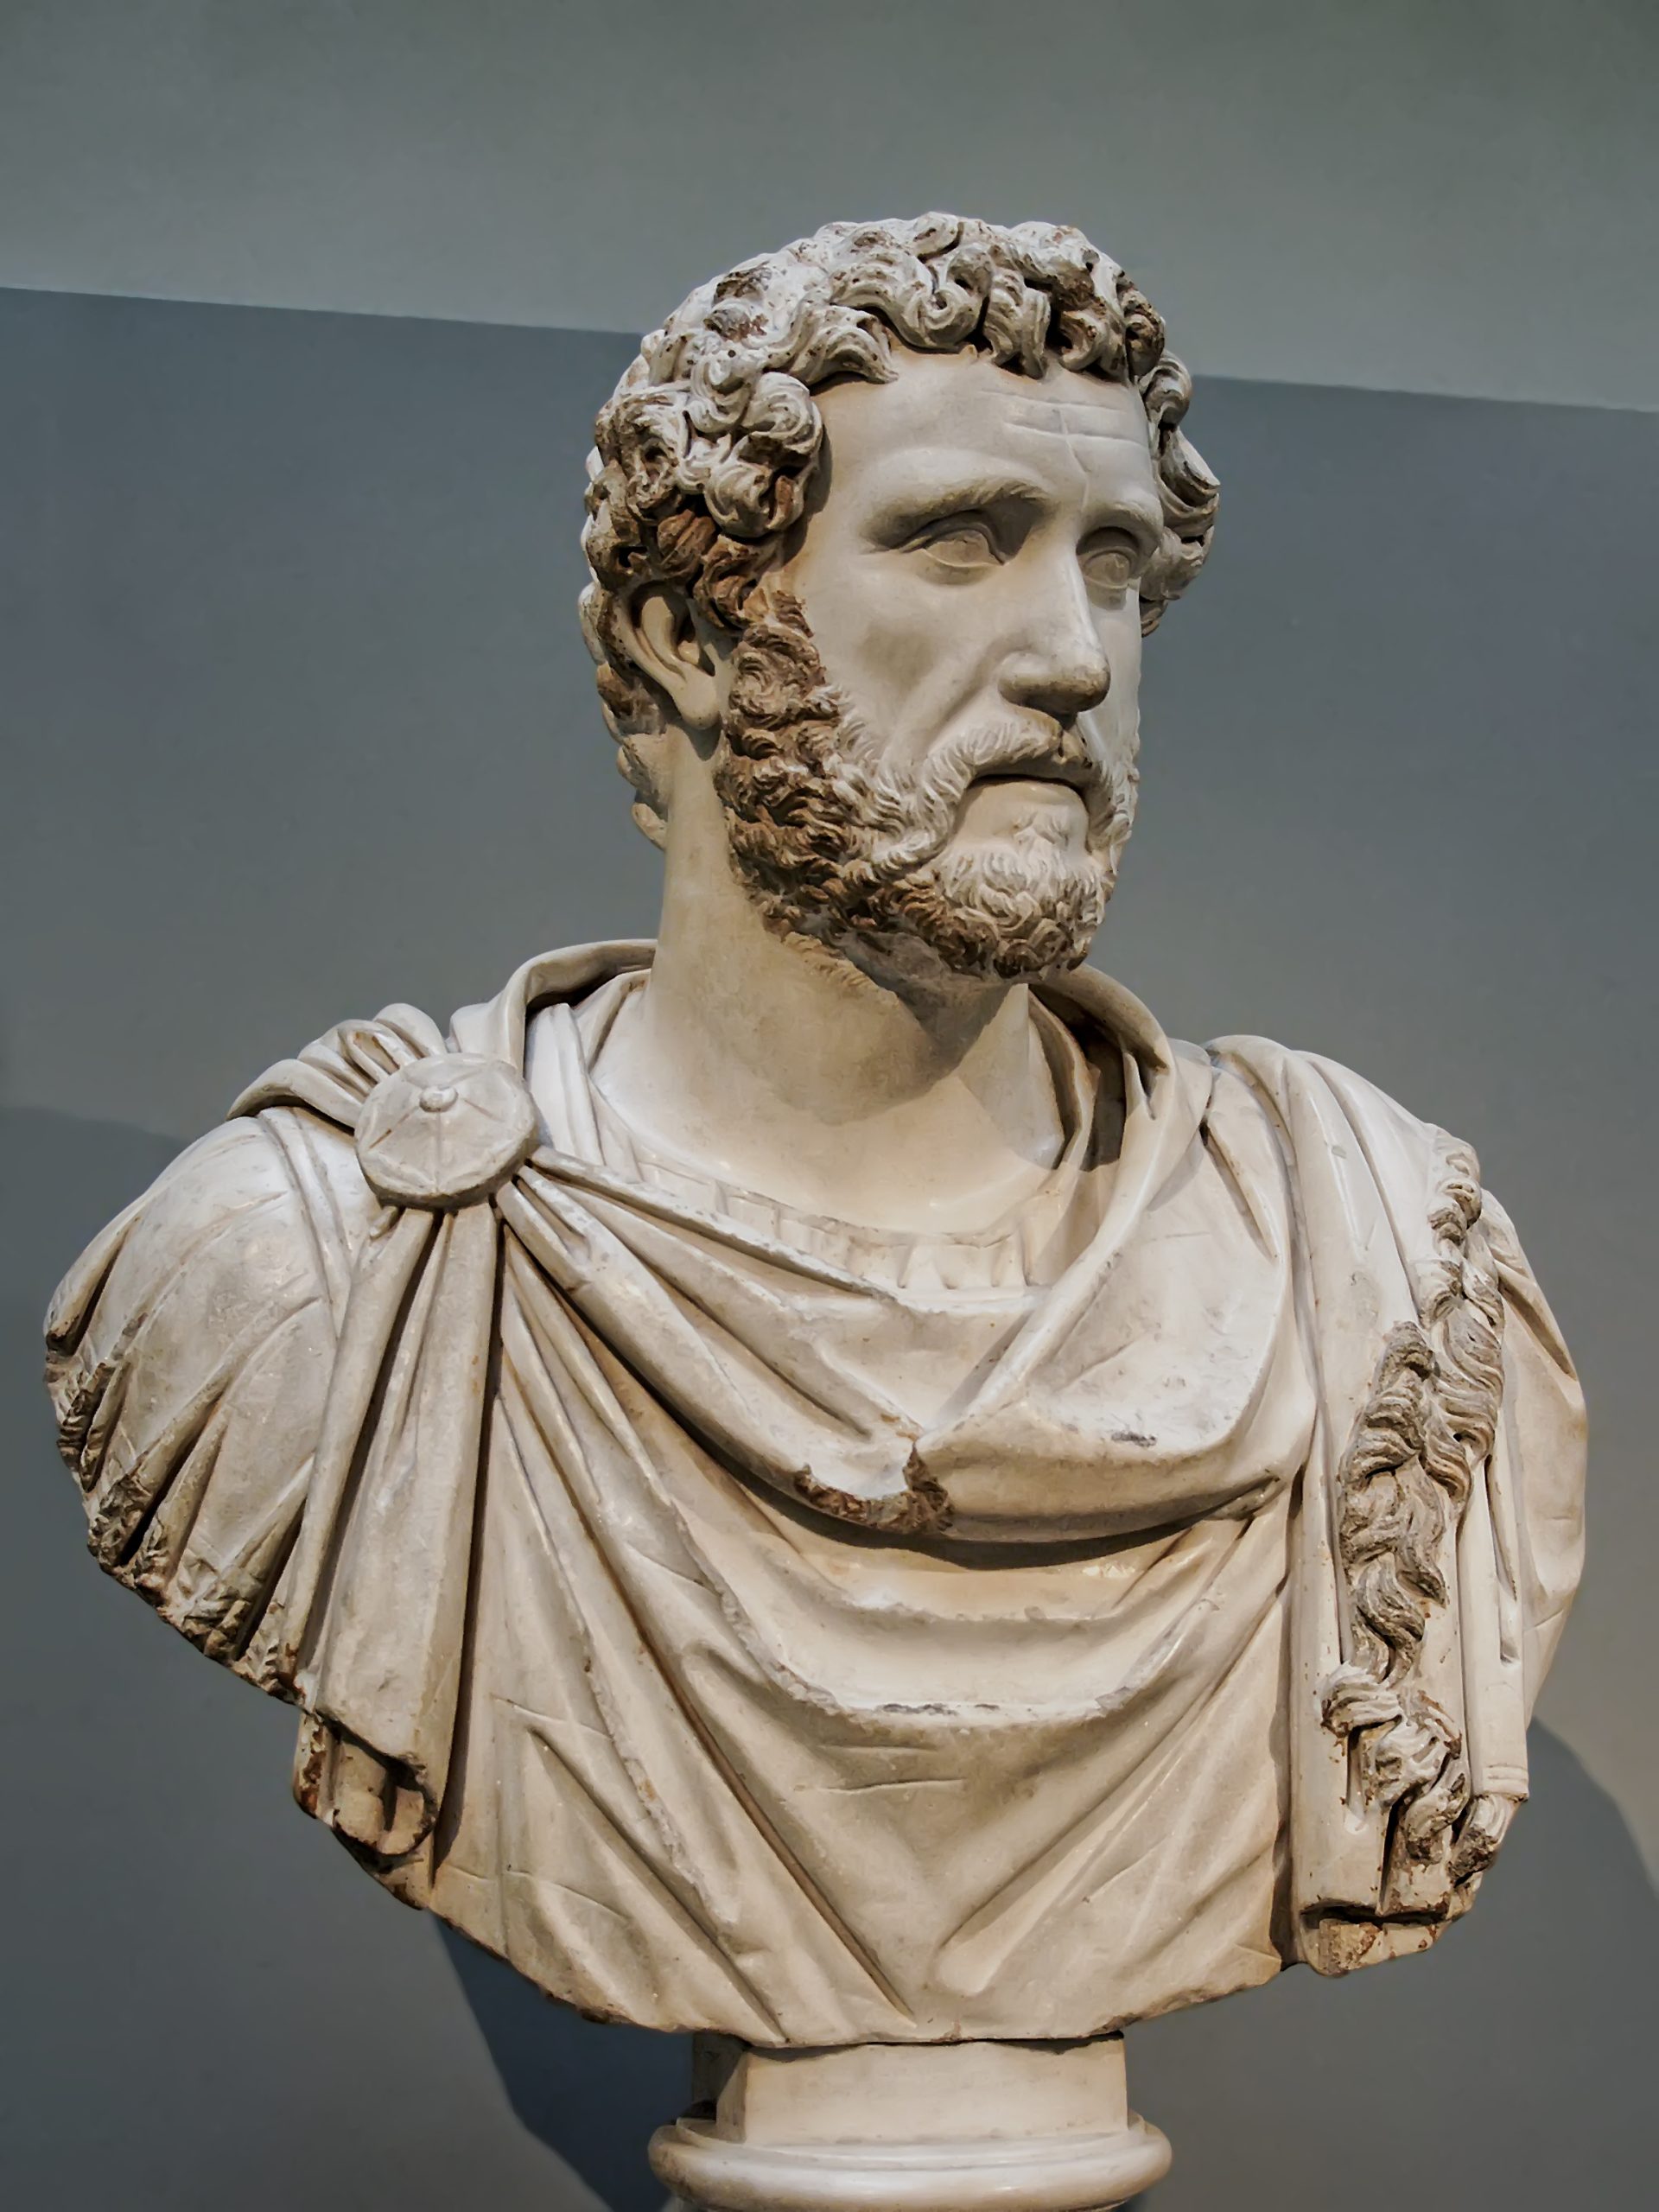 Justin Martyr and Antoninus Pius – The Ancient and Medieval World